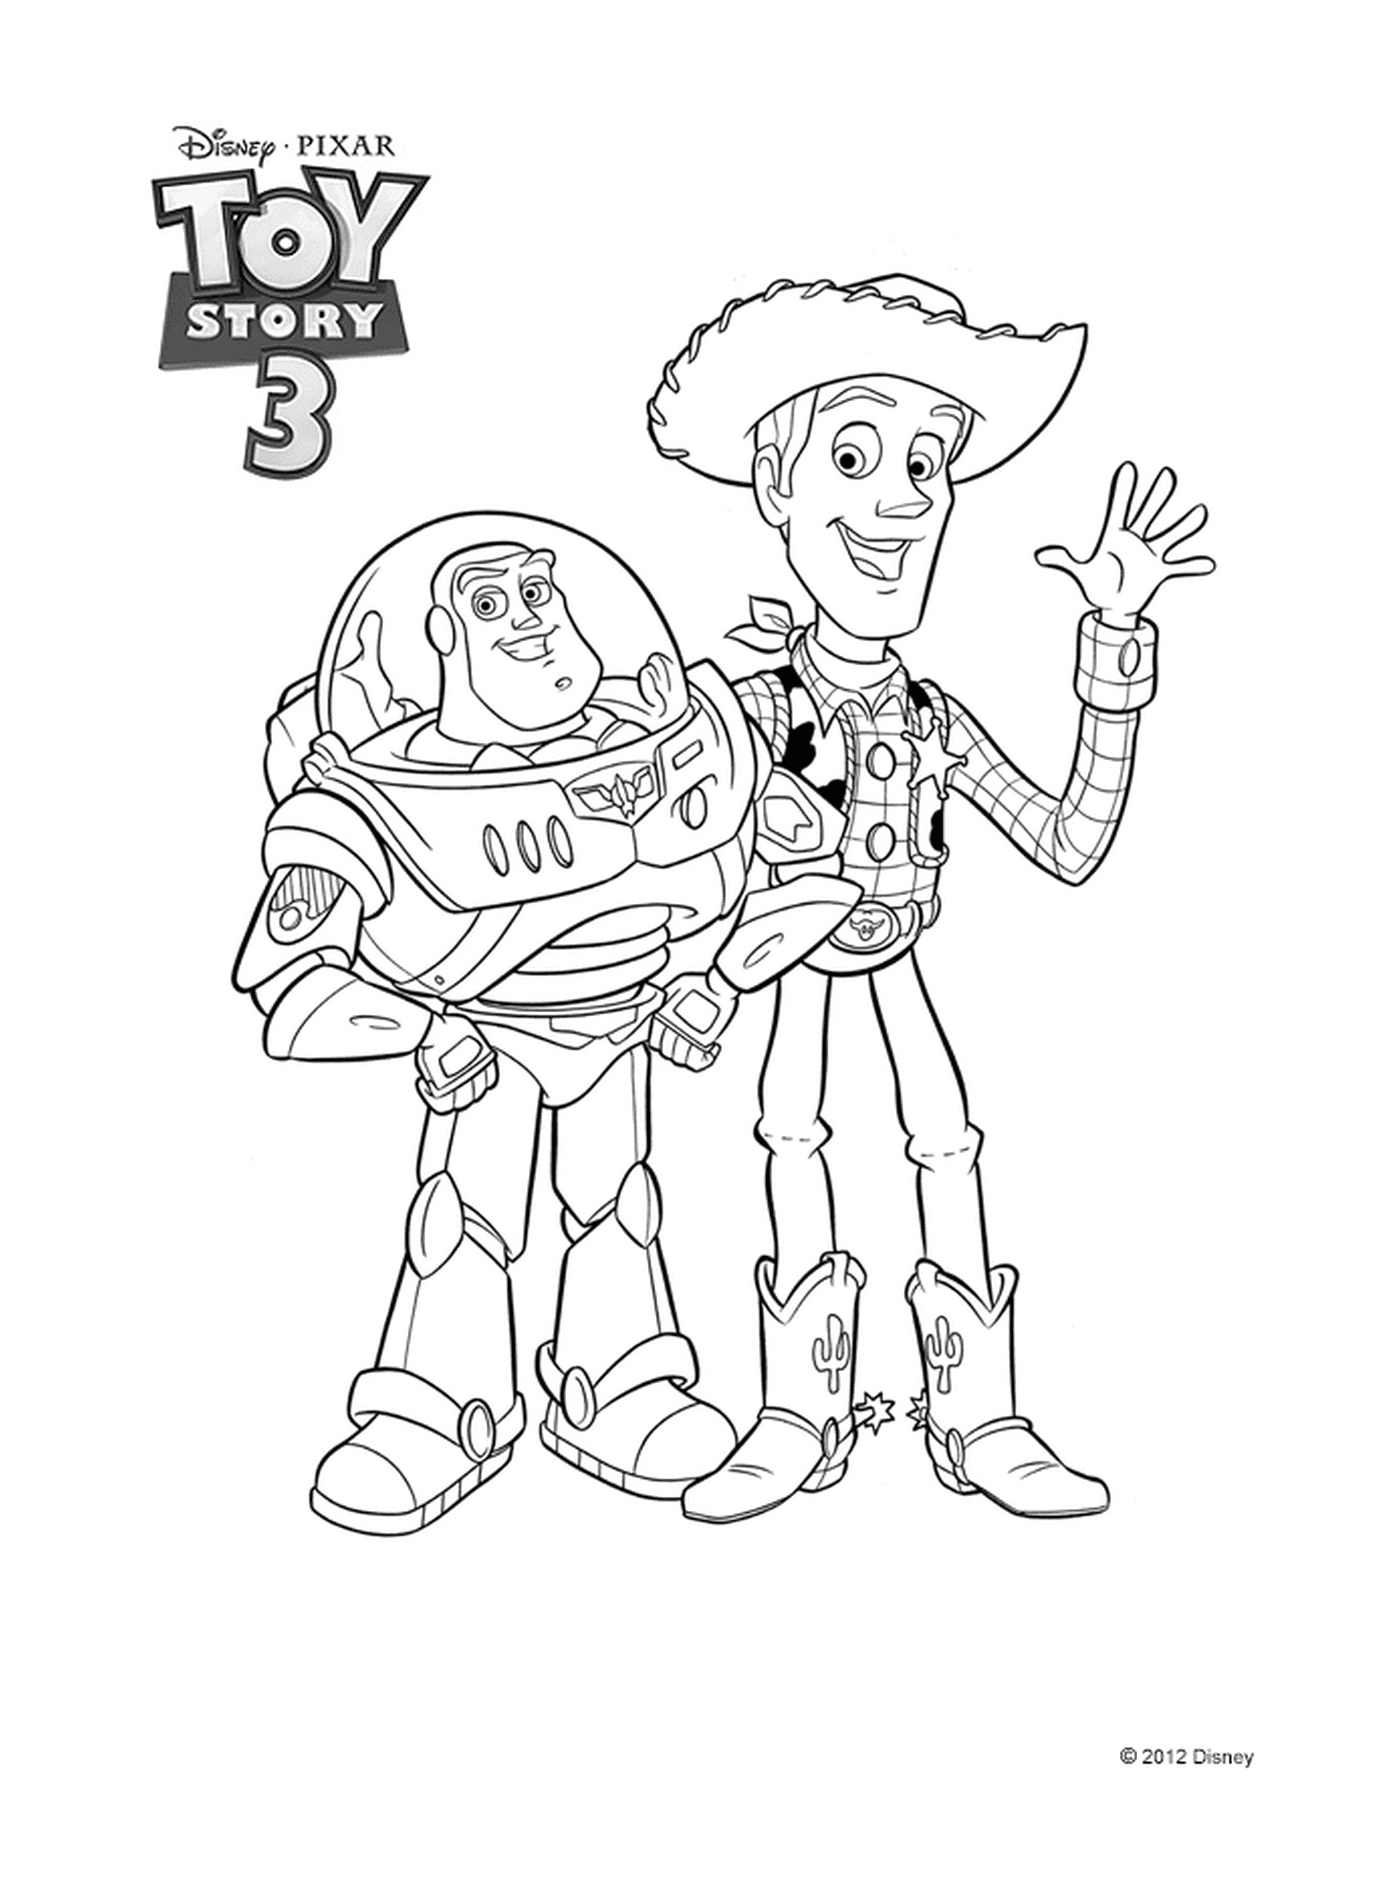  Toy Story 3, adventure with Buzz and Woody 